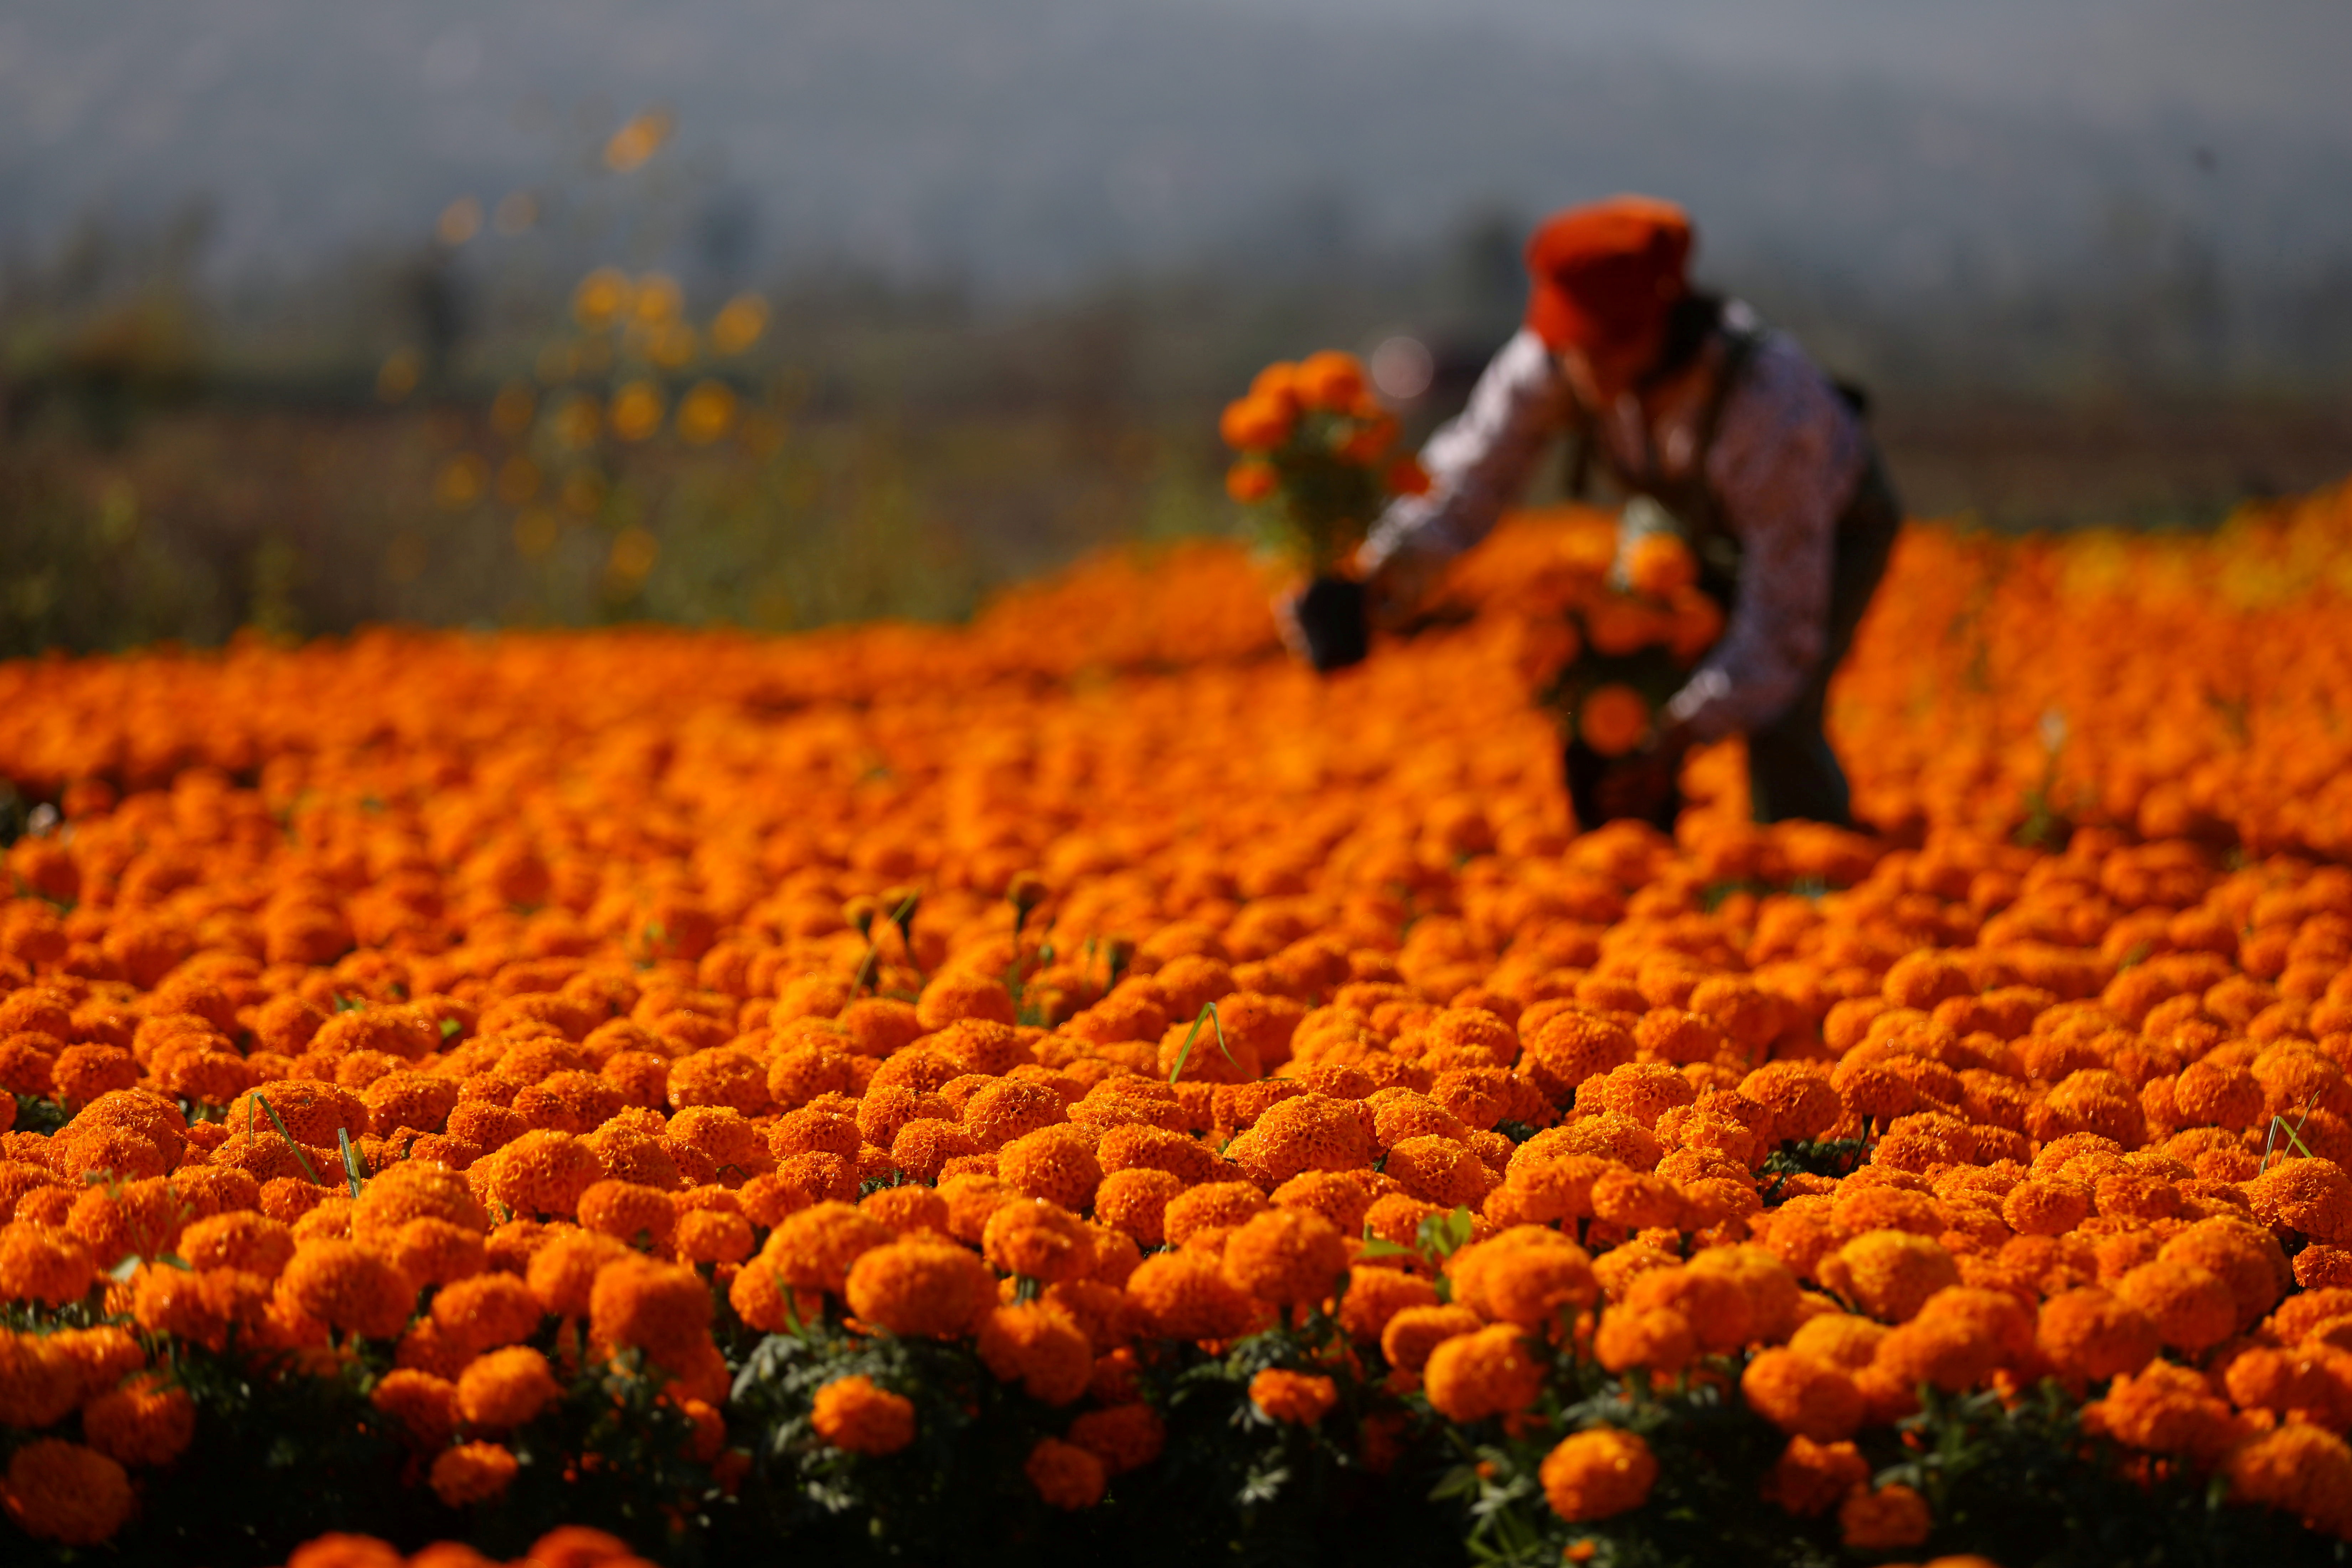 A woman harvests Cempasuchil marigolds to be used during Mexico's Day of the Dead celebrations at San Luis Tlaxialtemalco nursery, in Xochimilco on the outskirts of Mexico City, Mexico October 28, 2021. REUTERS/Edgard Garrido/File Photo